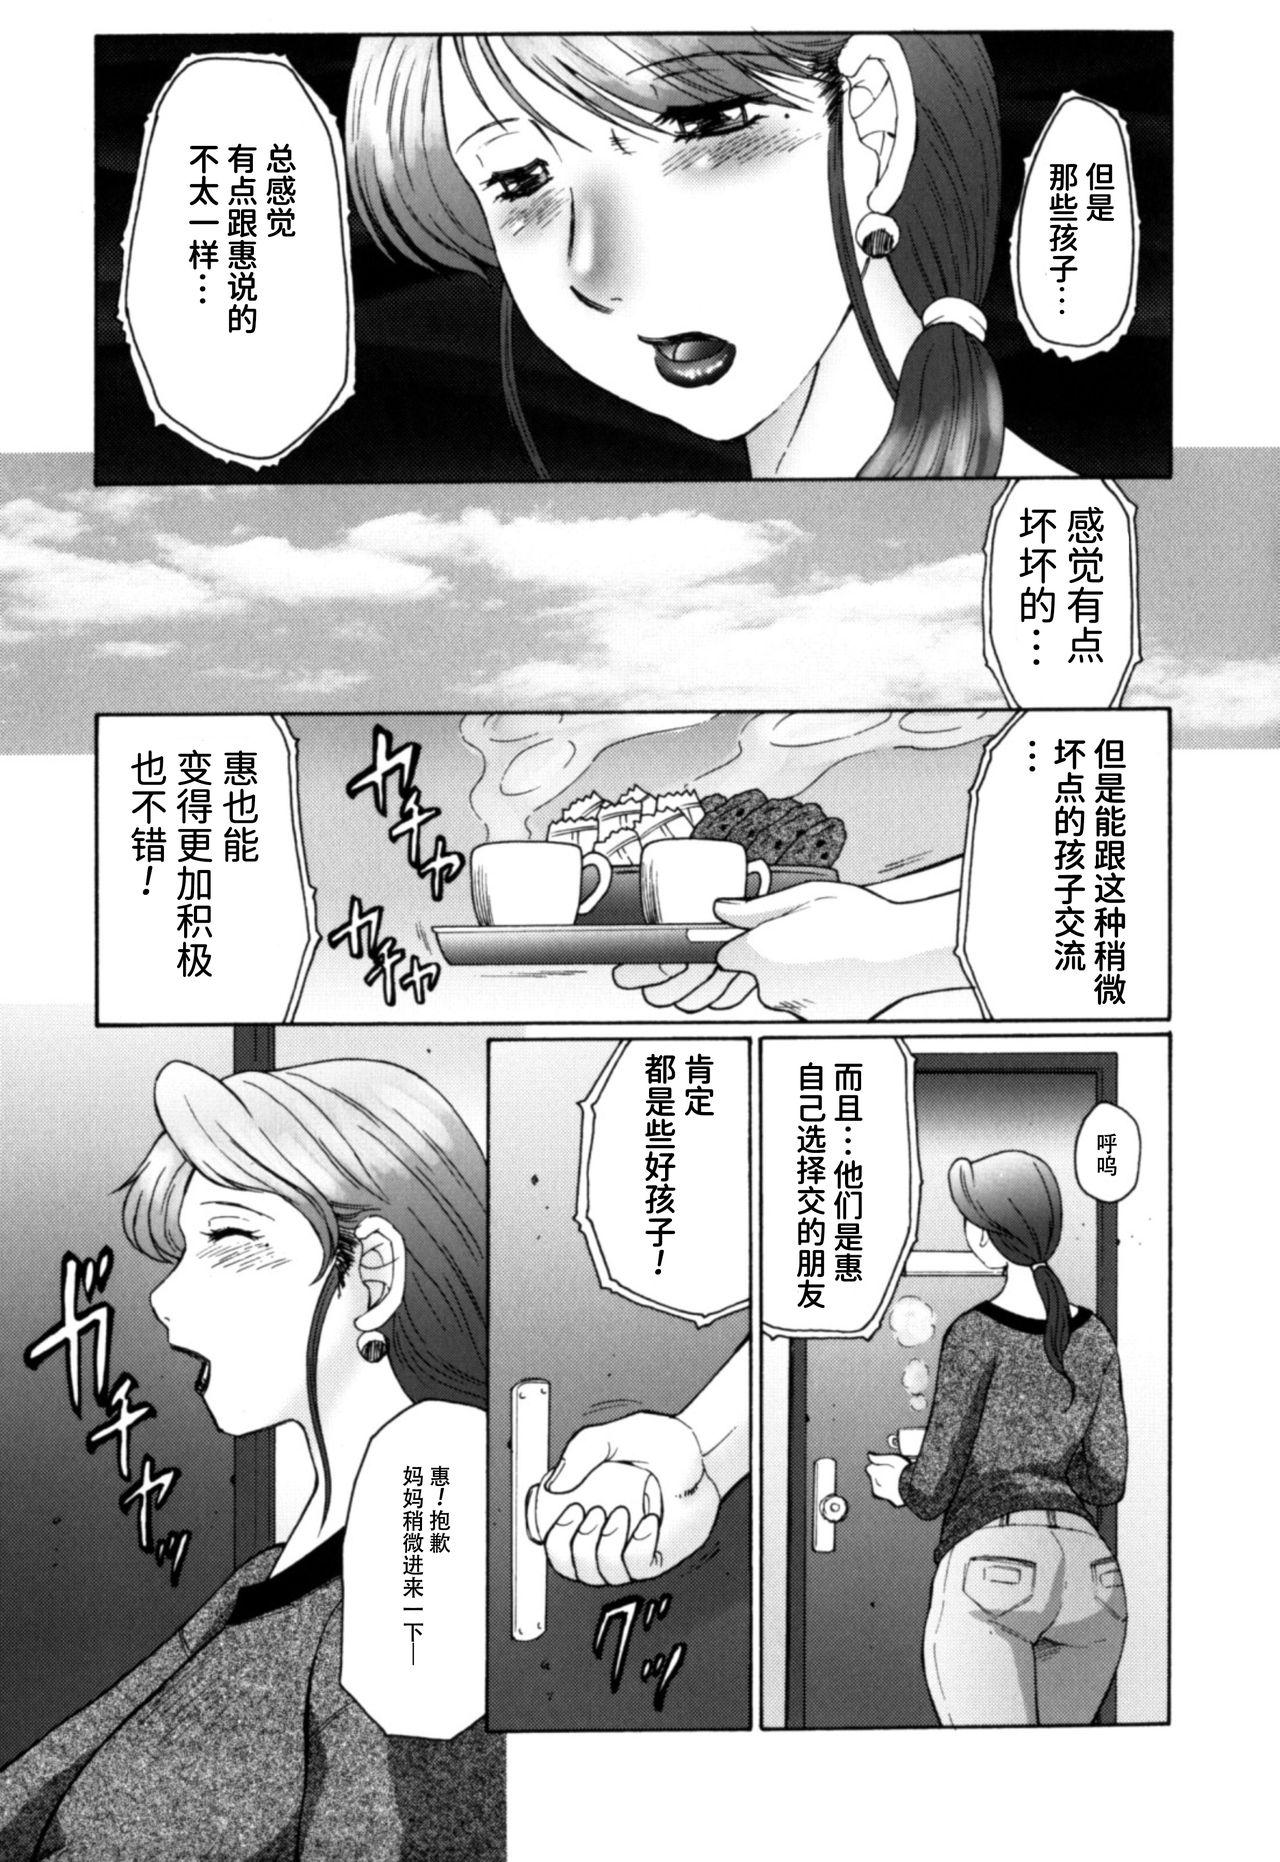 Assfingering [Fuusen Club] Haha Mamire Ch. 1 [Chinese]【不可视汉化】 Camsex - Page 6